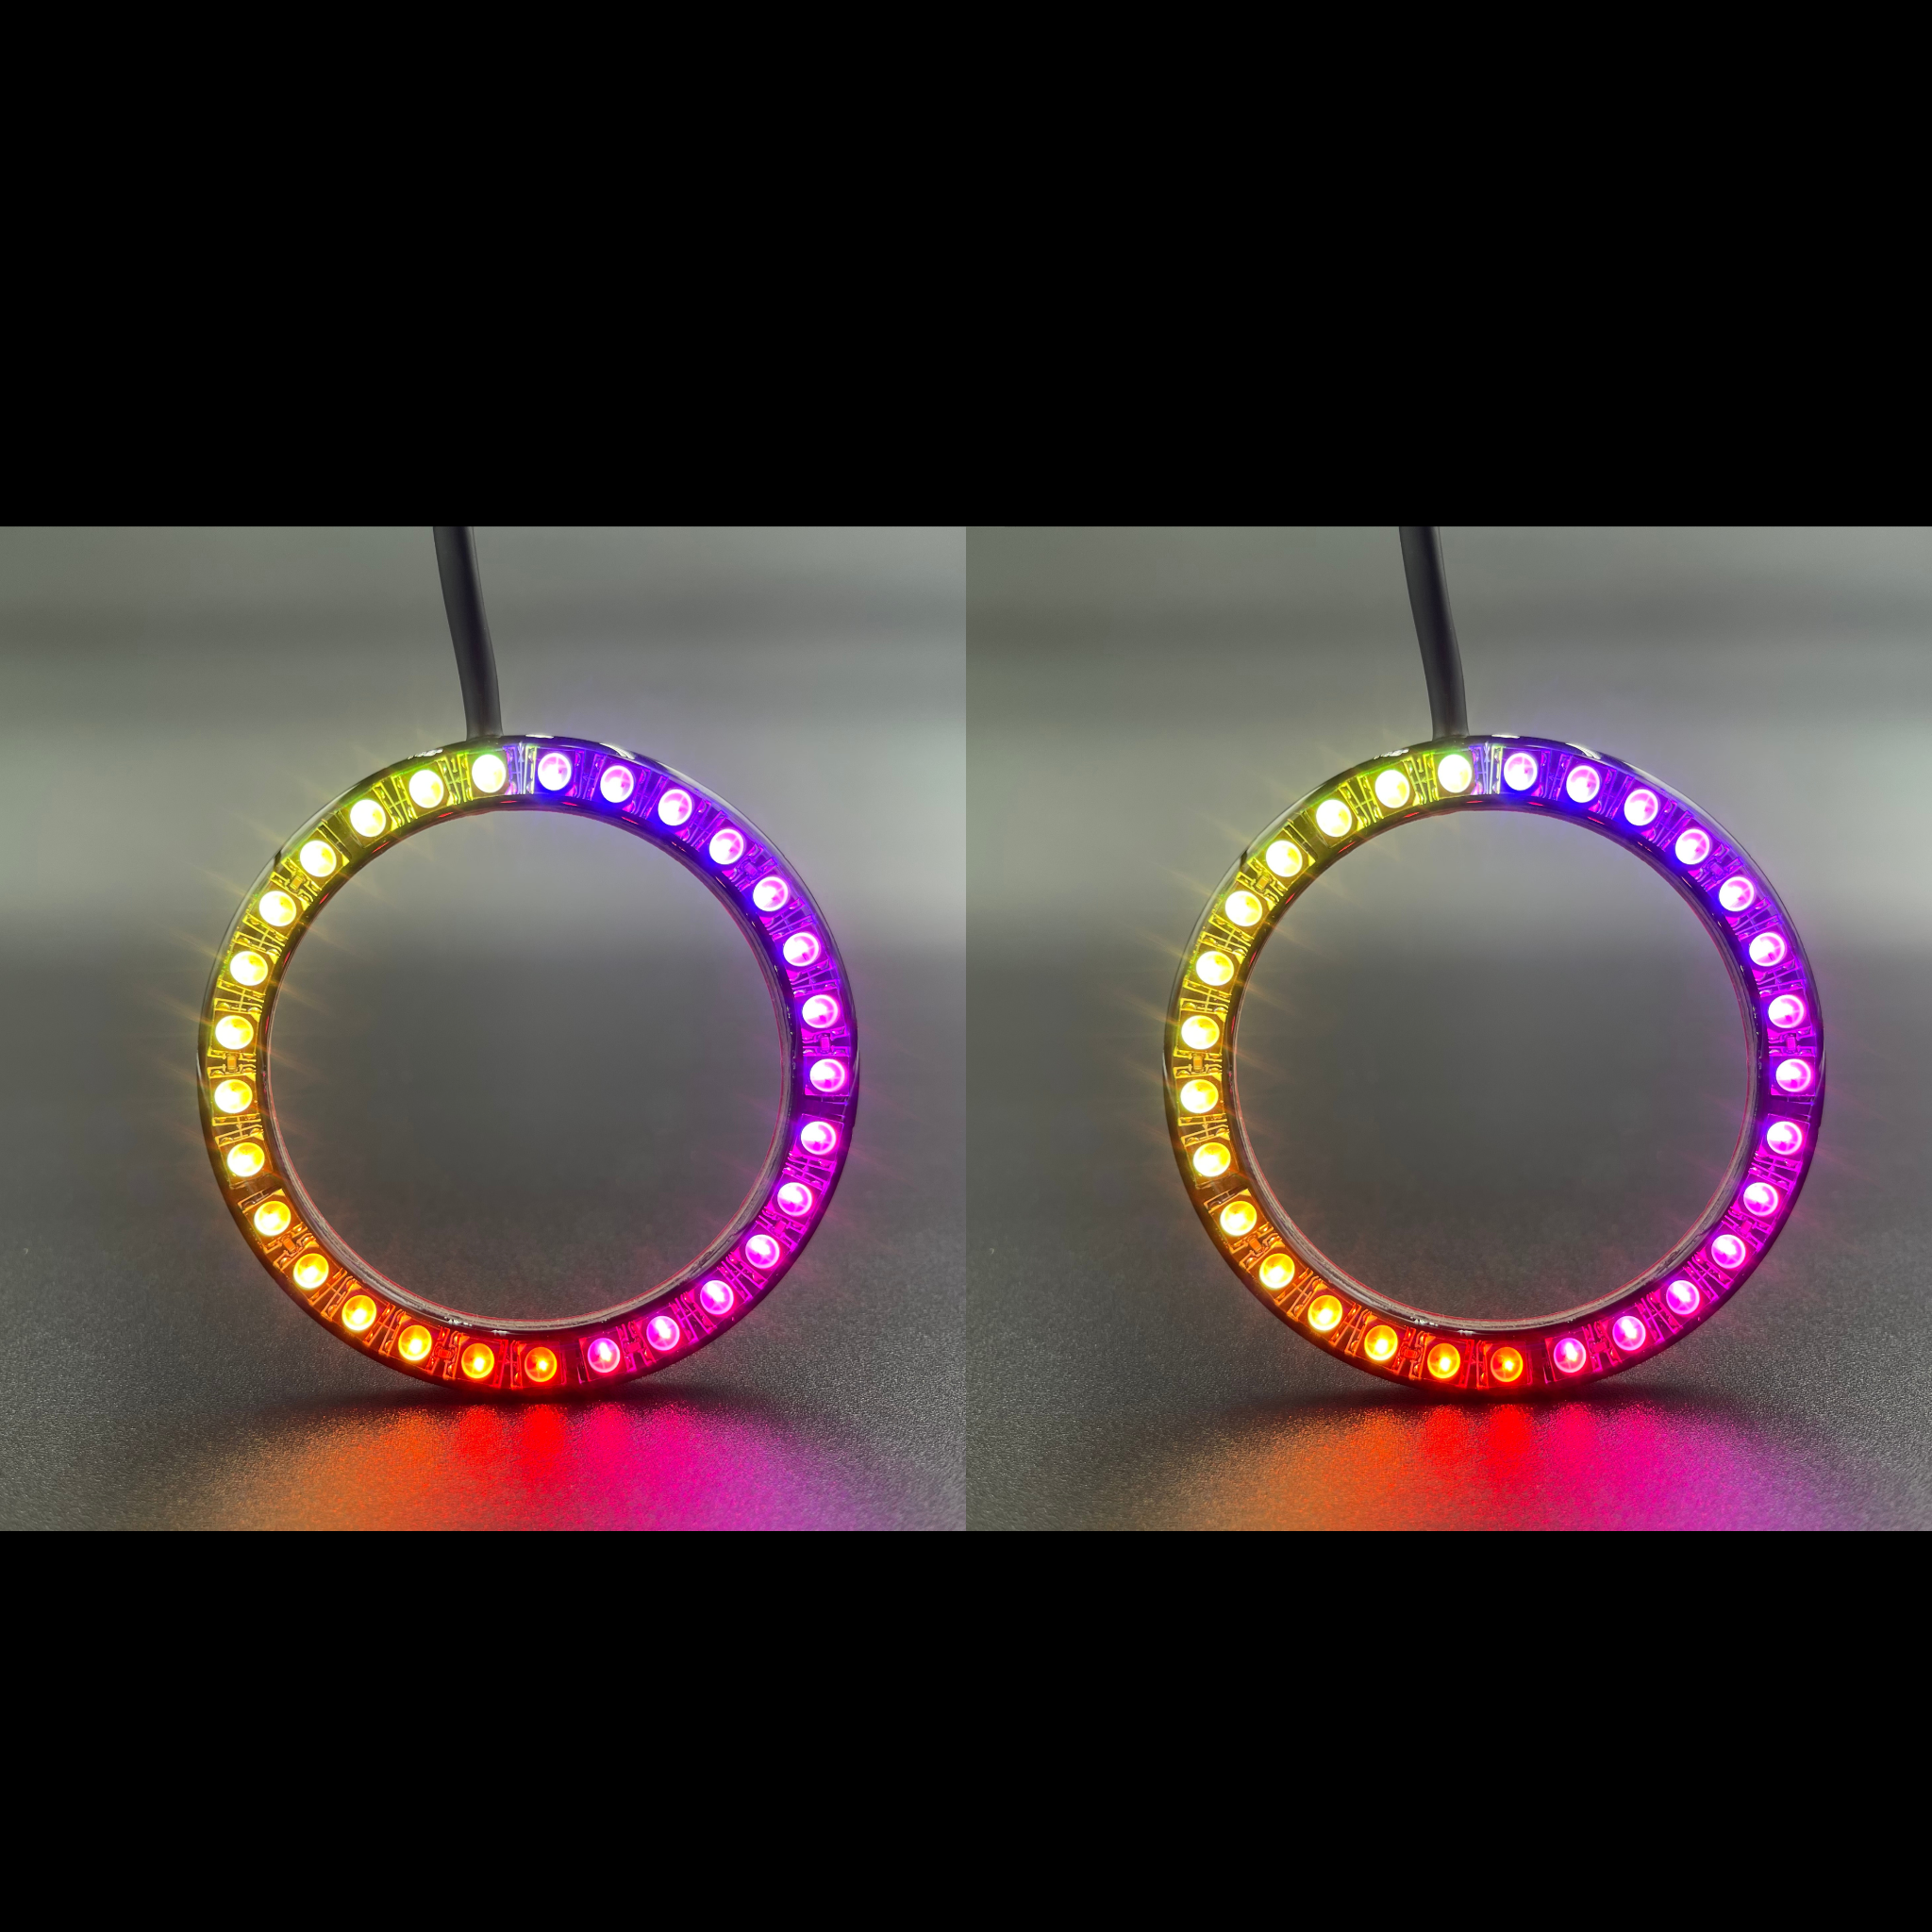 2004-2008 Ford F150 Multicolor Halo Kit - RGB Halo Kits Multicolor Flow Series Color Chasing RGBWA LED headlight kit Colorshift Oracle Lighting Trendz OneUpLighting Morimoto theretrofitsource AutoLEDTech Diode Dynamics